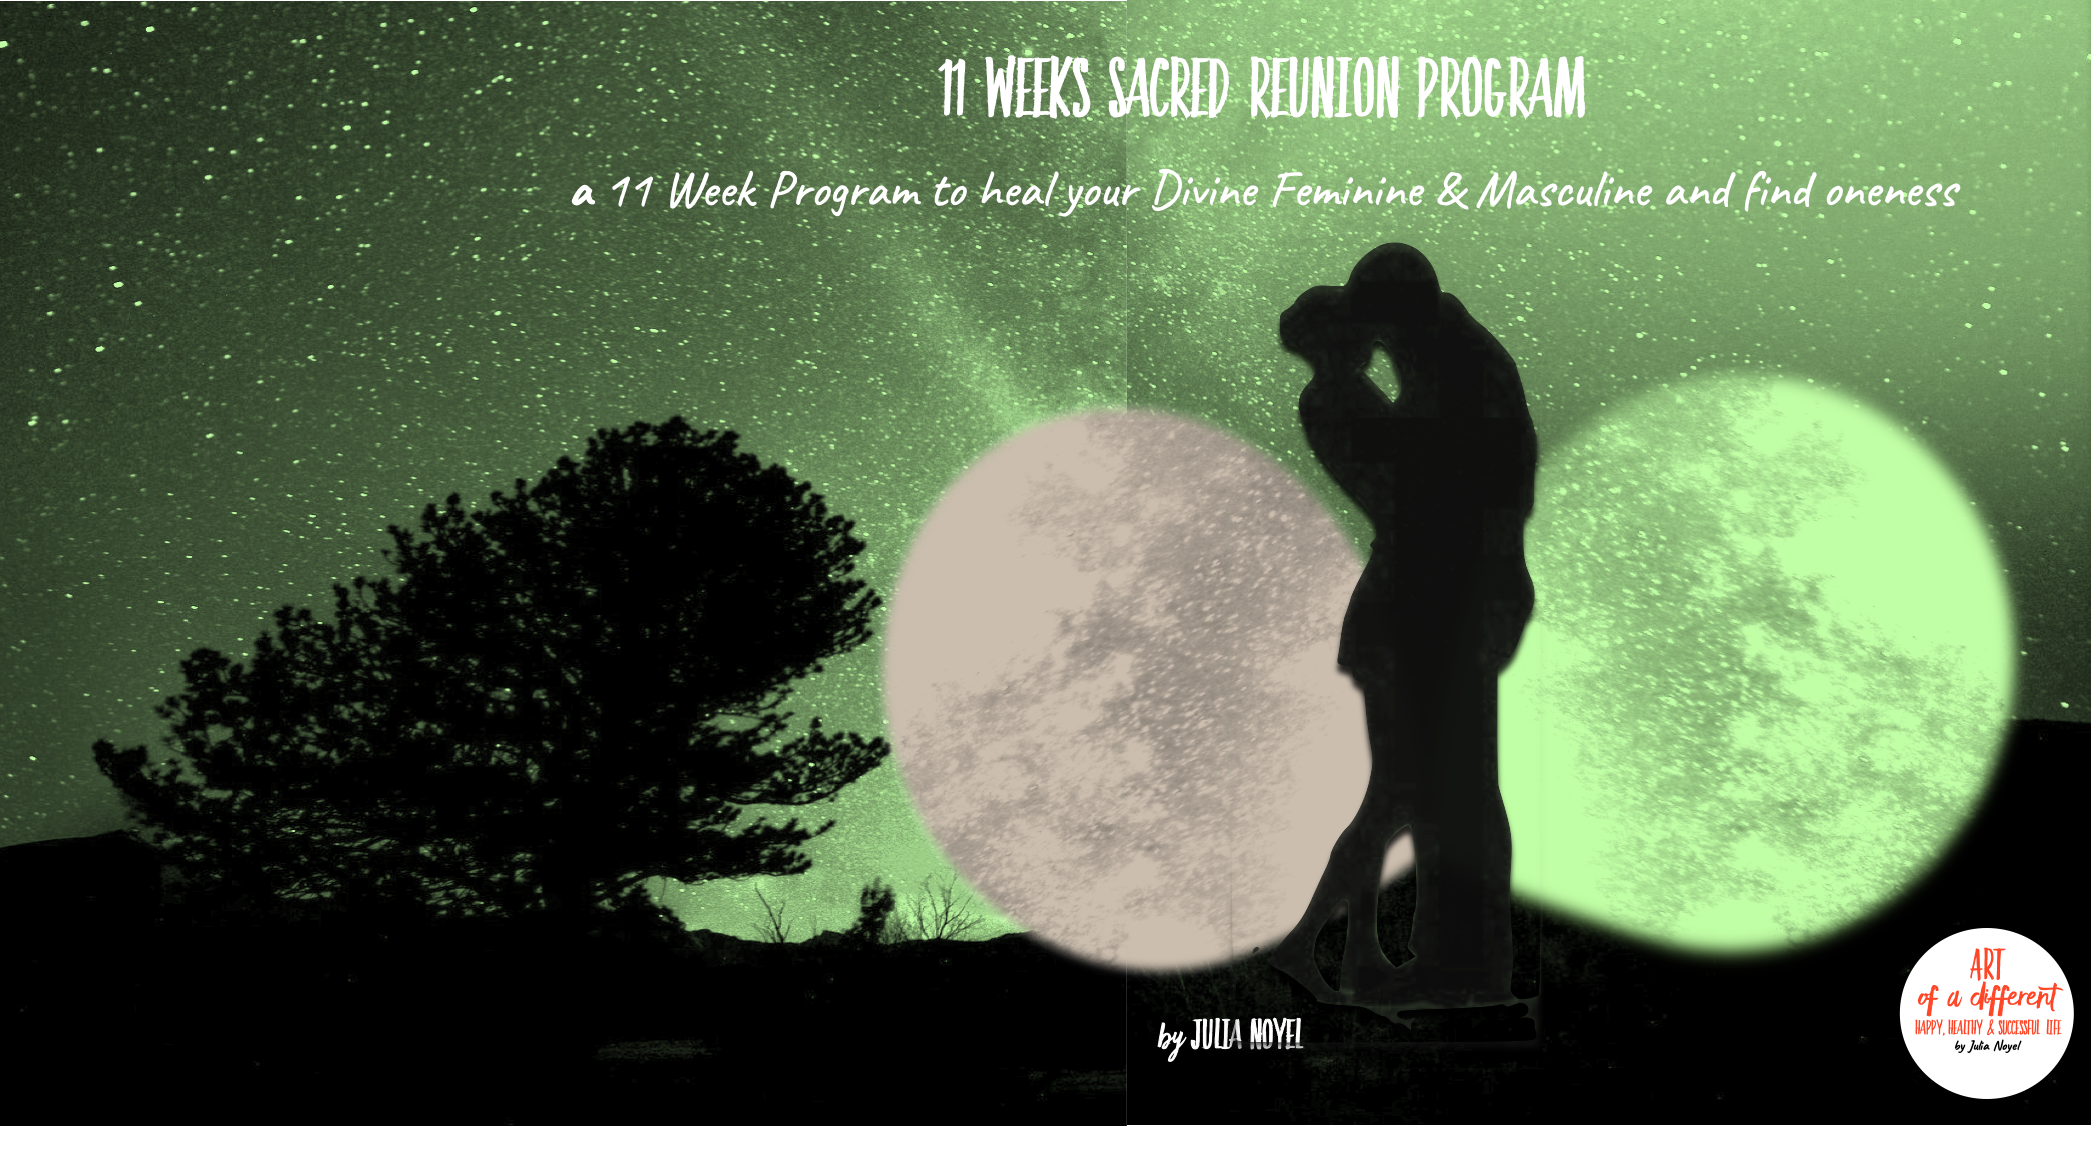 11 Week Program to heal your Divine Feminine & Masculine and find oneness